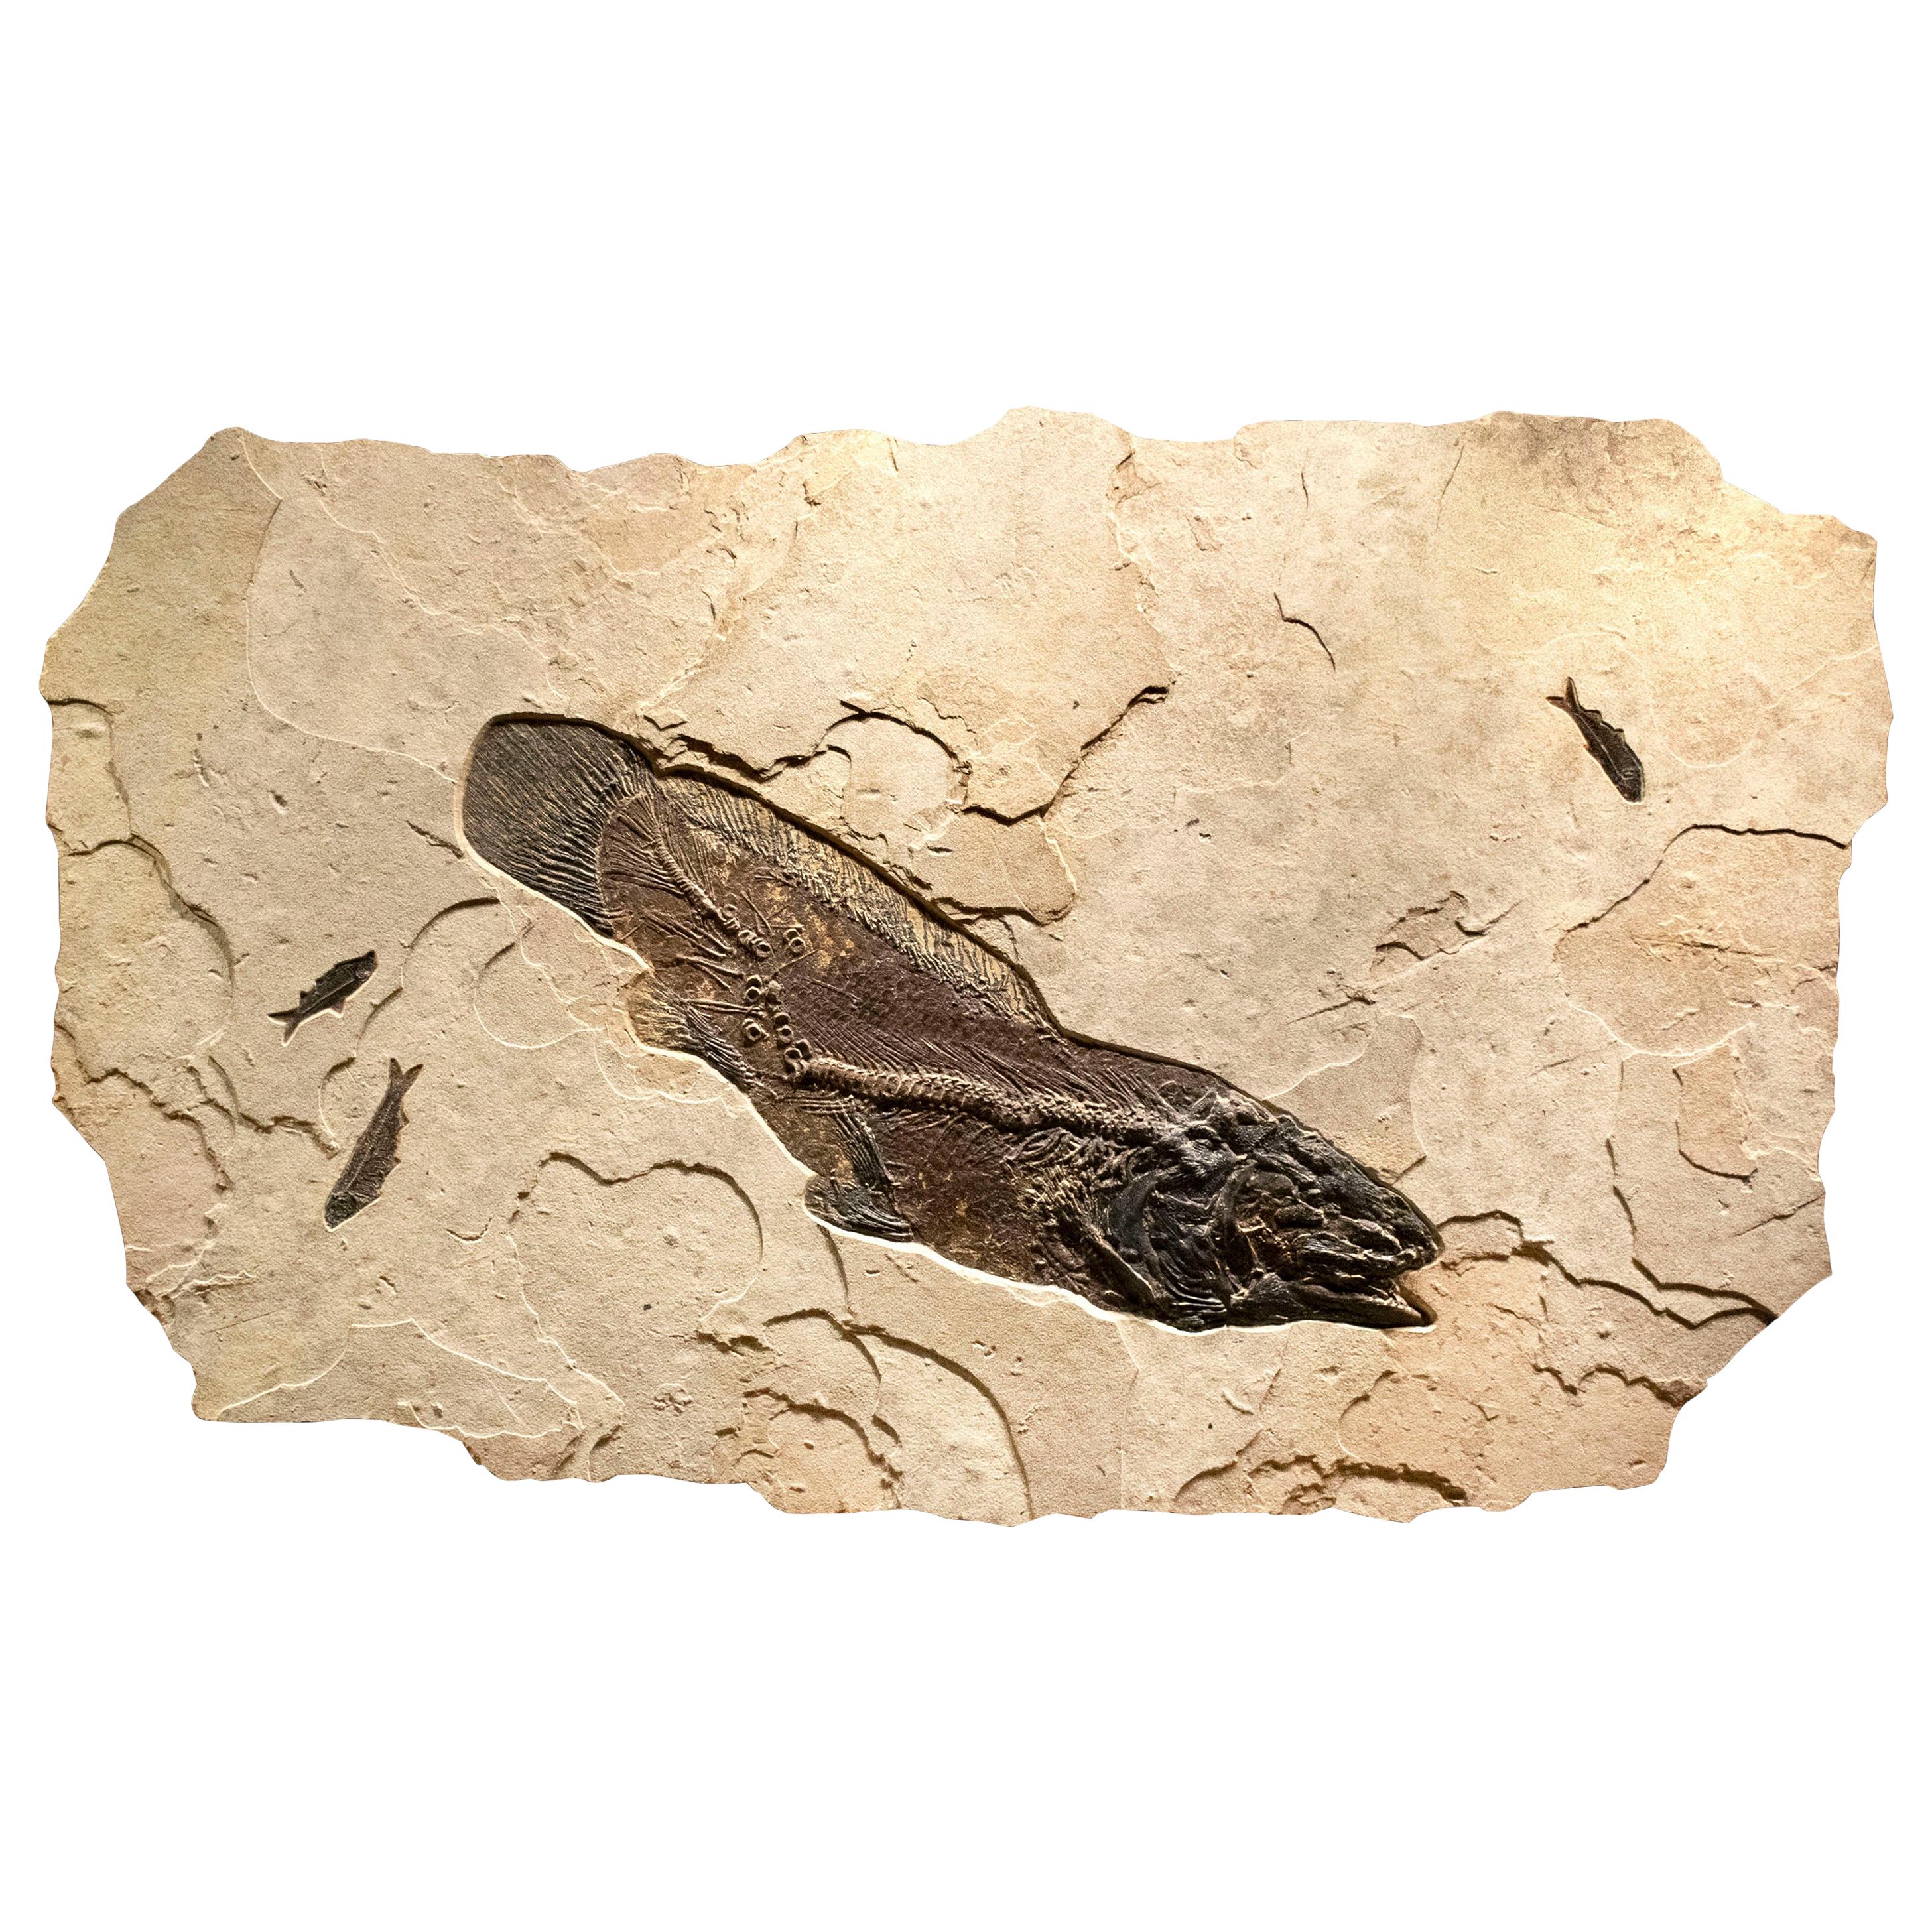 50 Million Year Old Eocene Era Fossil Fish Amia Mural in Stone, from Wyoming